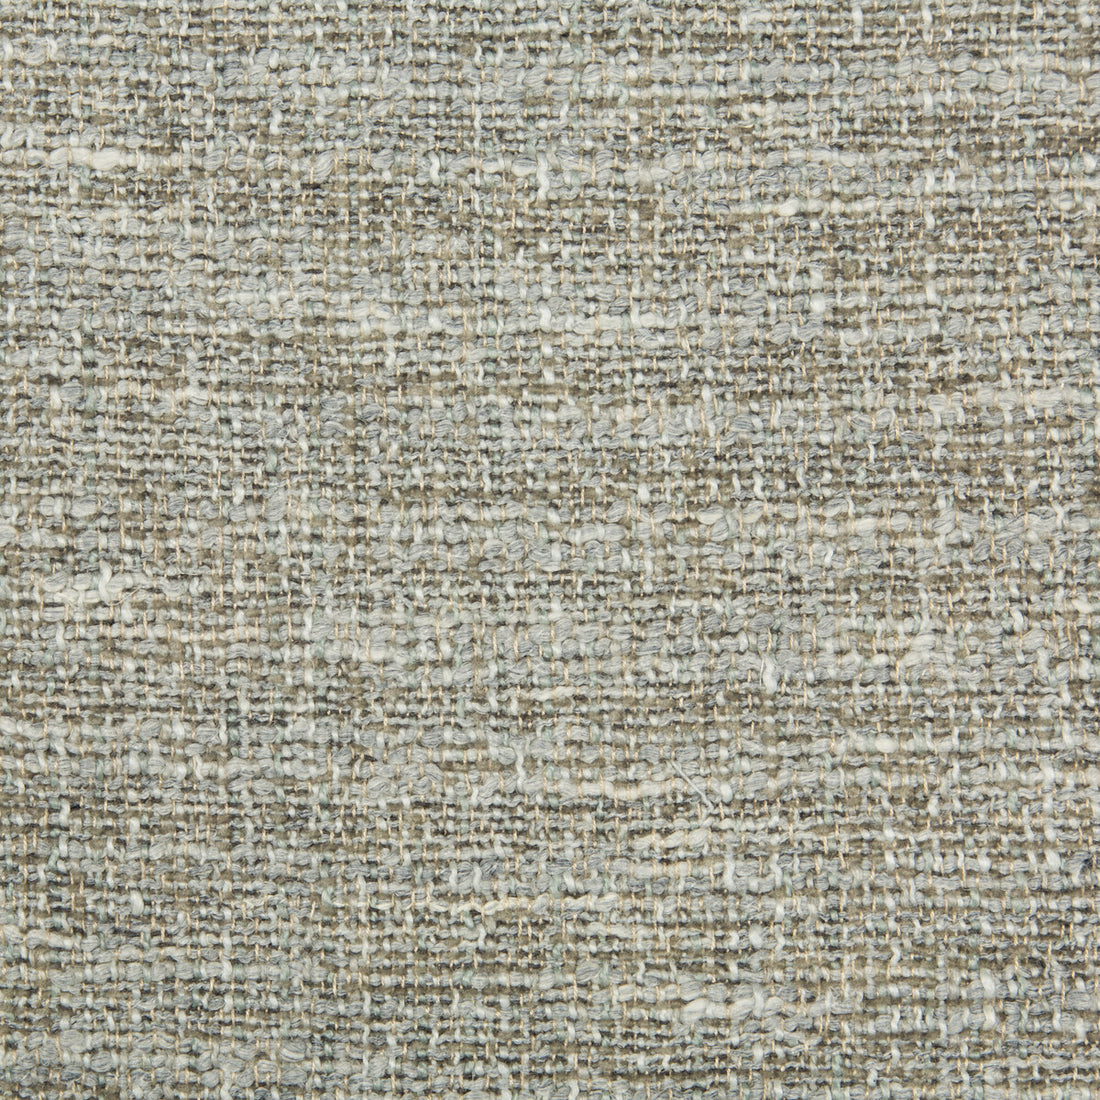 Craggy fabric in pearl gray color - pattern 34839.11.0 - by Kravet Couture in the Barbara Barry Panorama collection